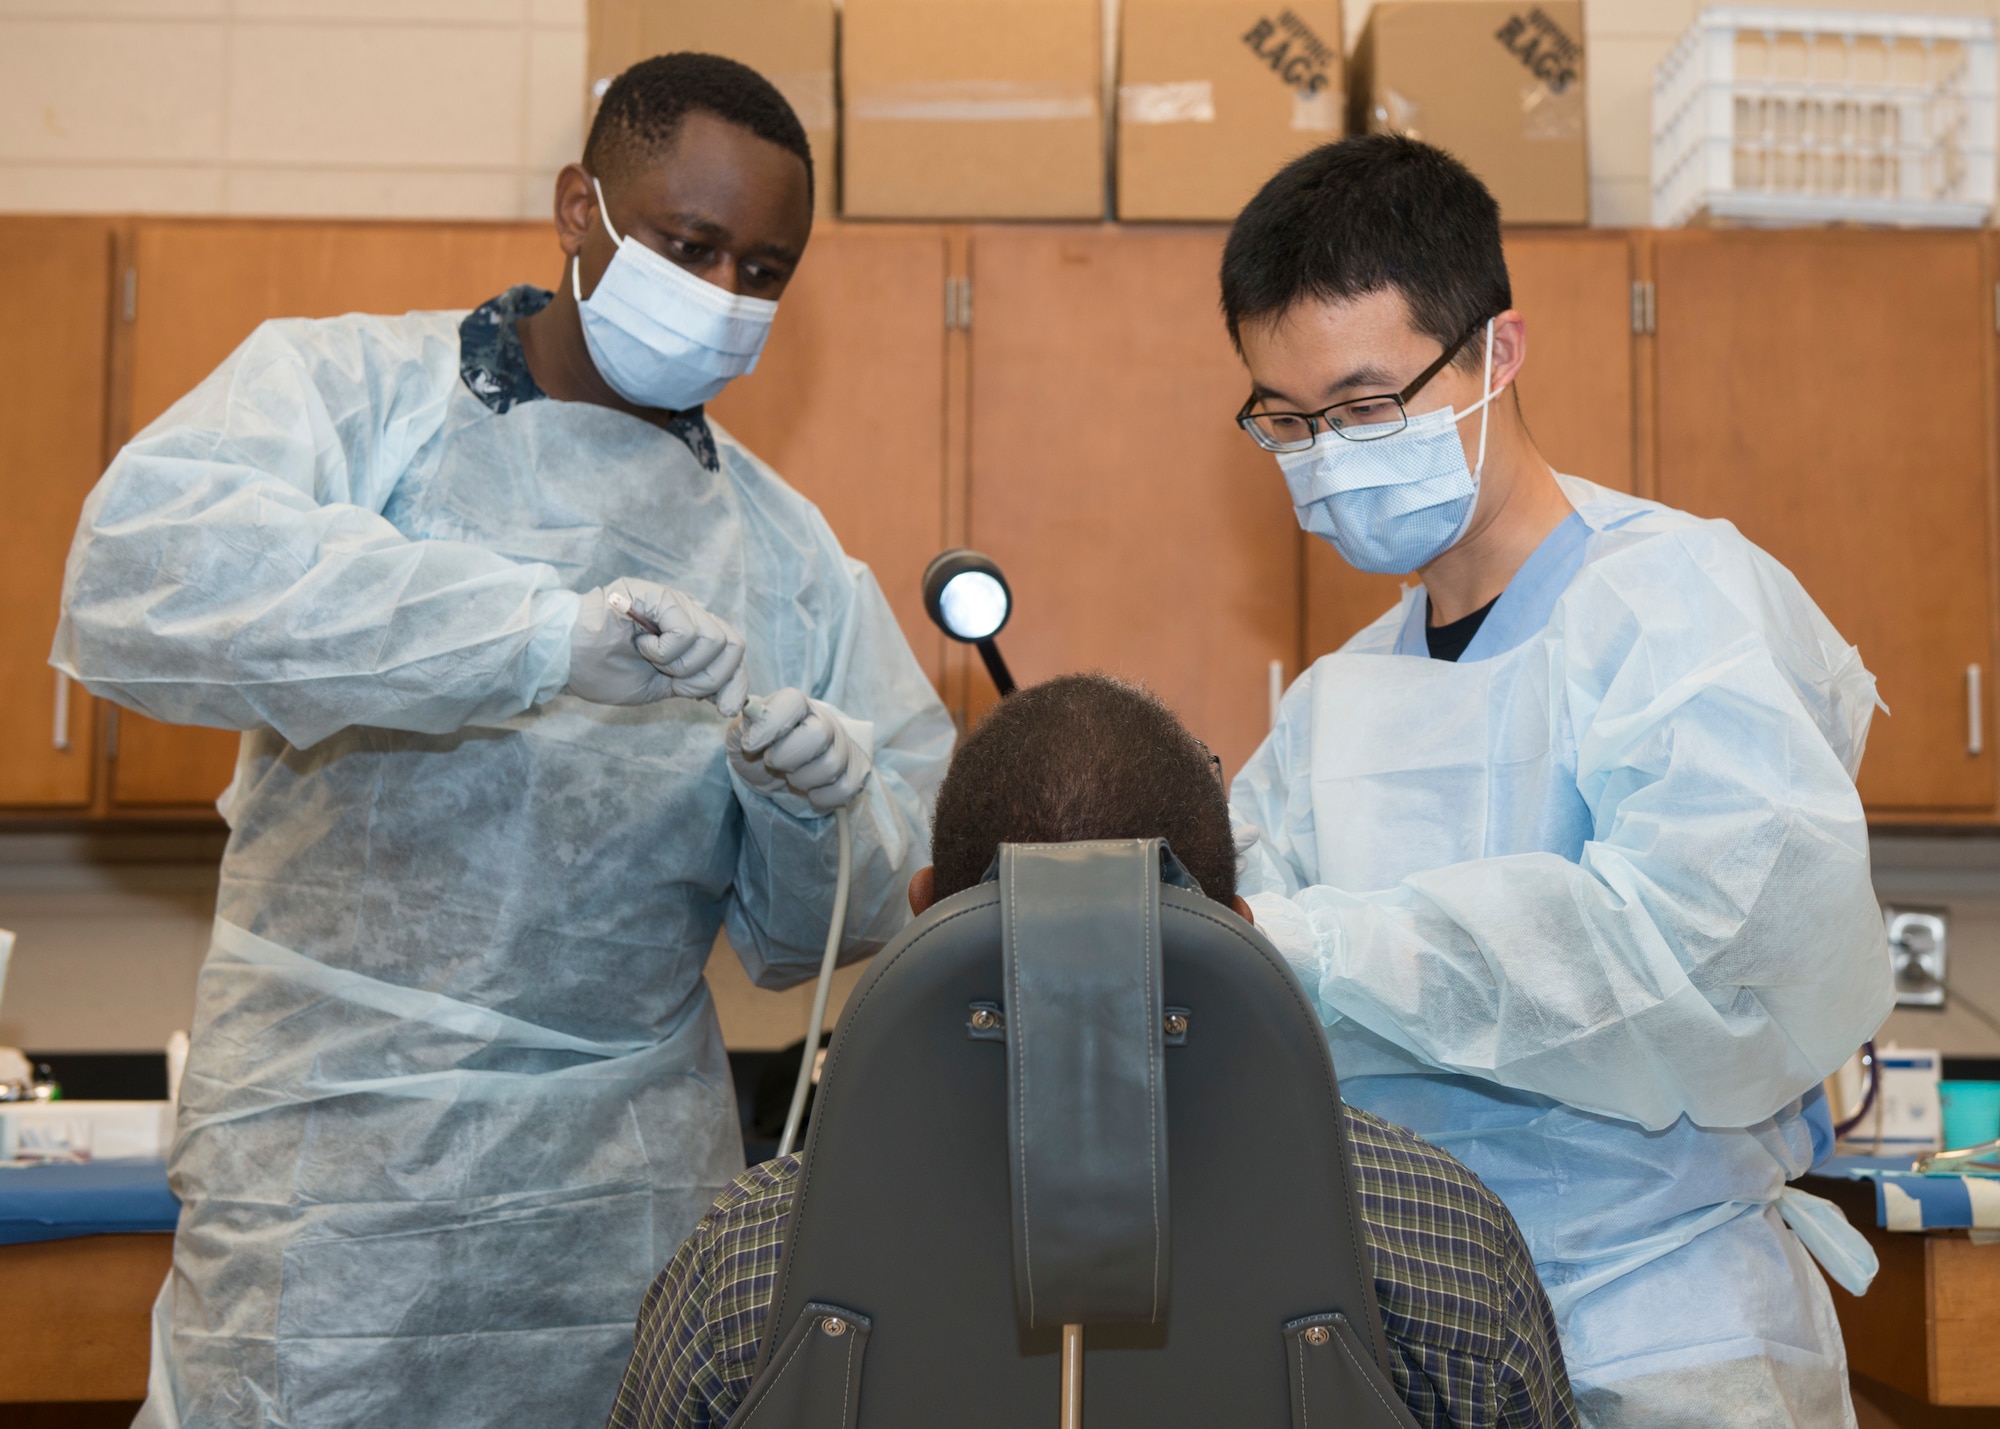 Capt. Xiang Wang (right), 103rd Medical Group dentist, examines a patient during East Central Georgia Innovative Readiness Training at Burke County High School, Waynesboro, Ga. June 20, 2019. East Central Georgia IRT is a civilian-military collaboration intended to build on mutually beneficial parnterships between U.S. communities and the Department of Defense to meet the training and readiness requirements for Active, Guard, and Reserve Service Members and units while addressing community health needs. (U.S. Air National Guard Photo by Staff Sgt. Steven Tucker)